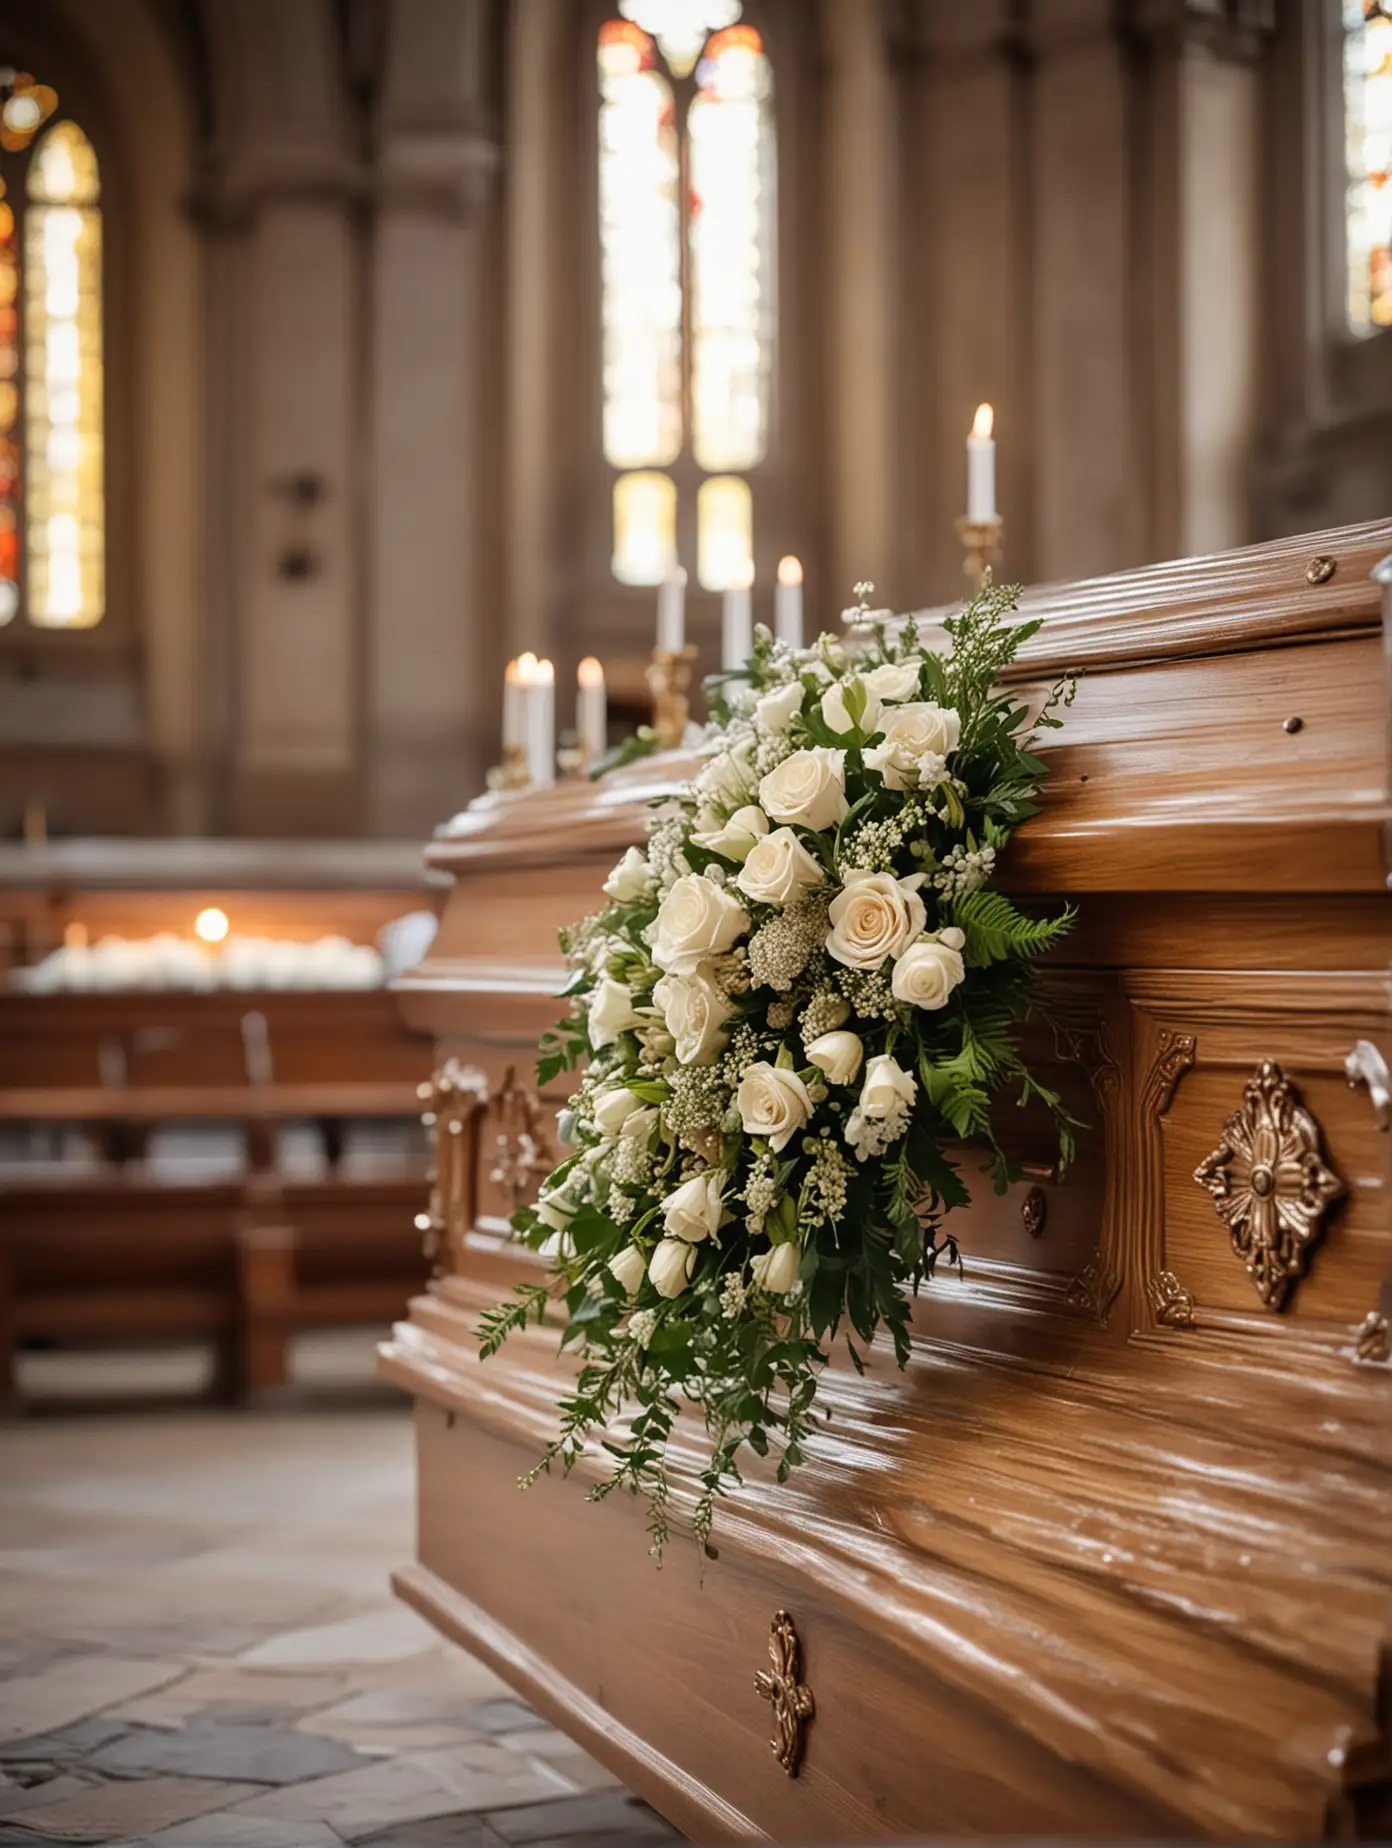 Modest Funeral Bouquet on Coffin Lid in Church Perspective